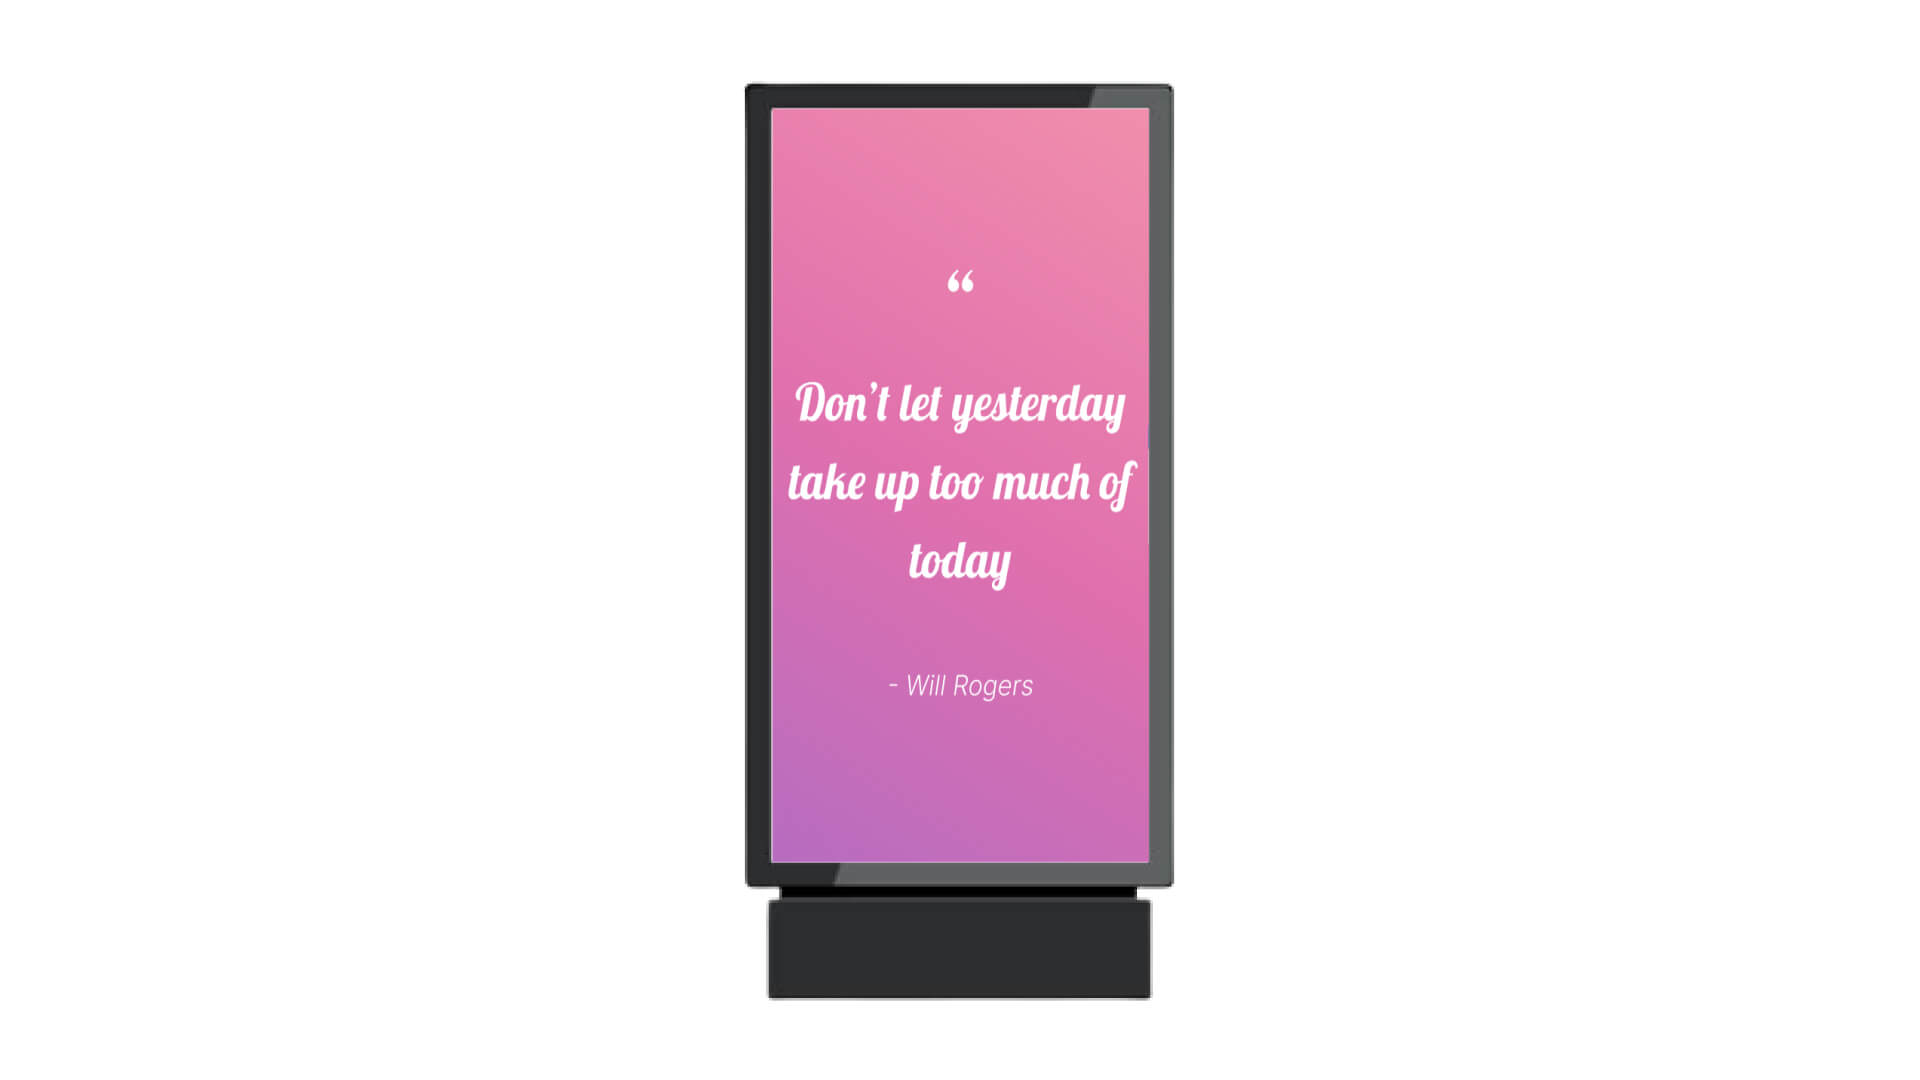 An inspiring company culture quote from Will Rogers is shown on a digital standee